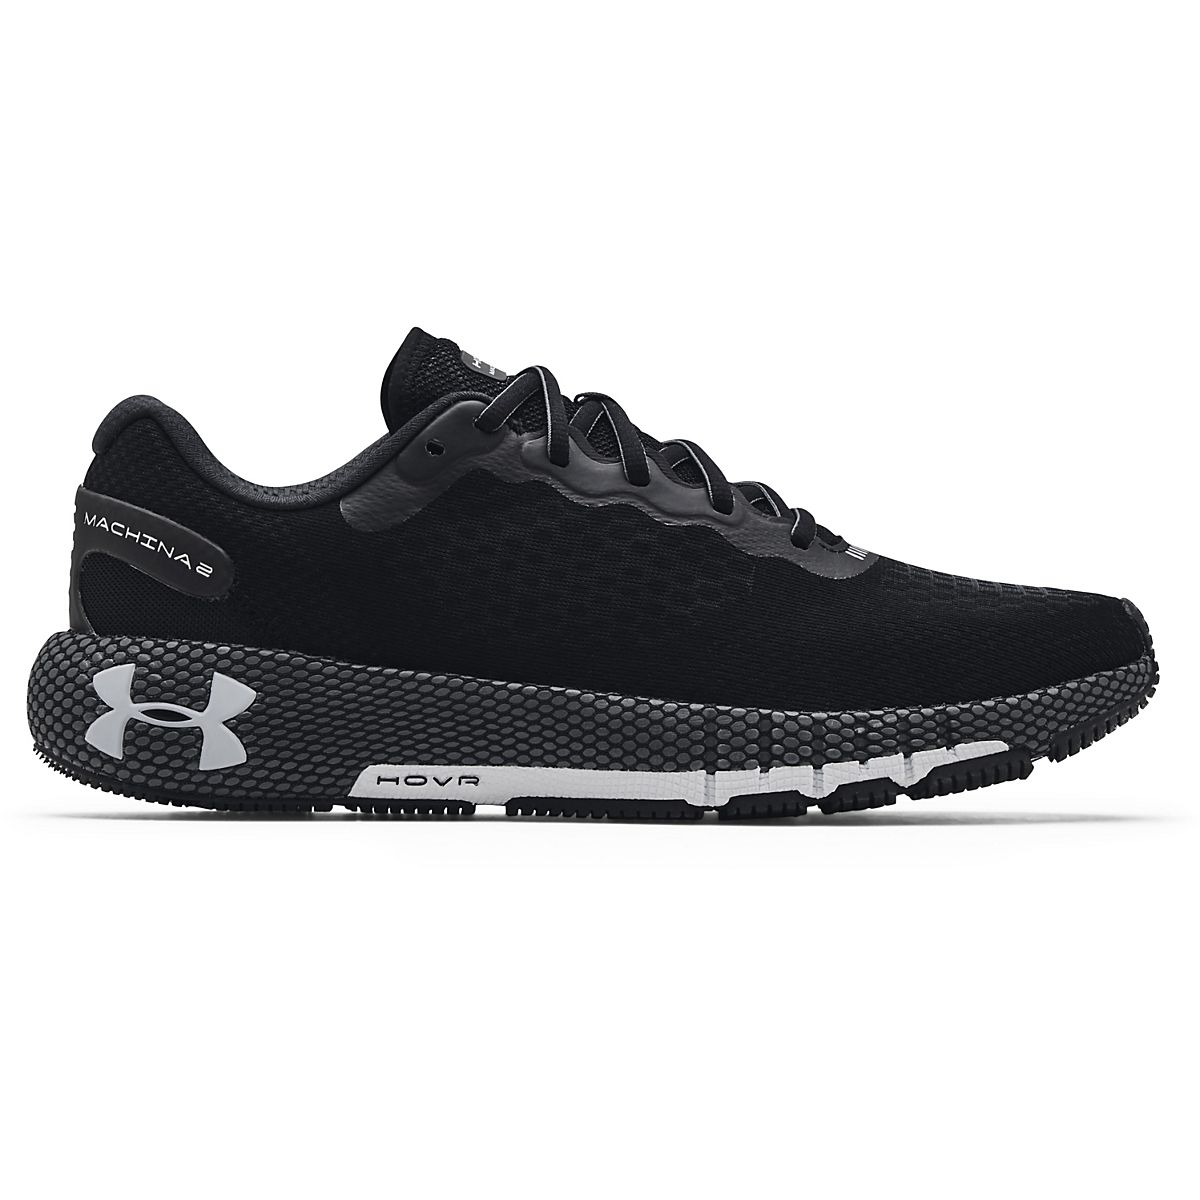 Under Armour Men's HOVR Machina 2 Running Shoes | Academy